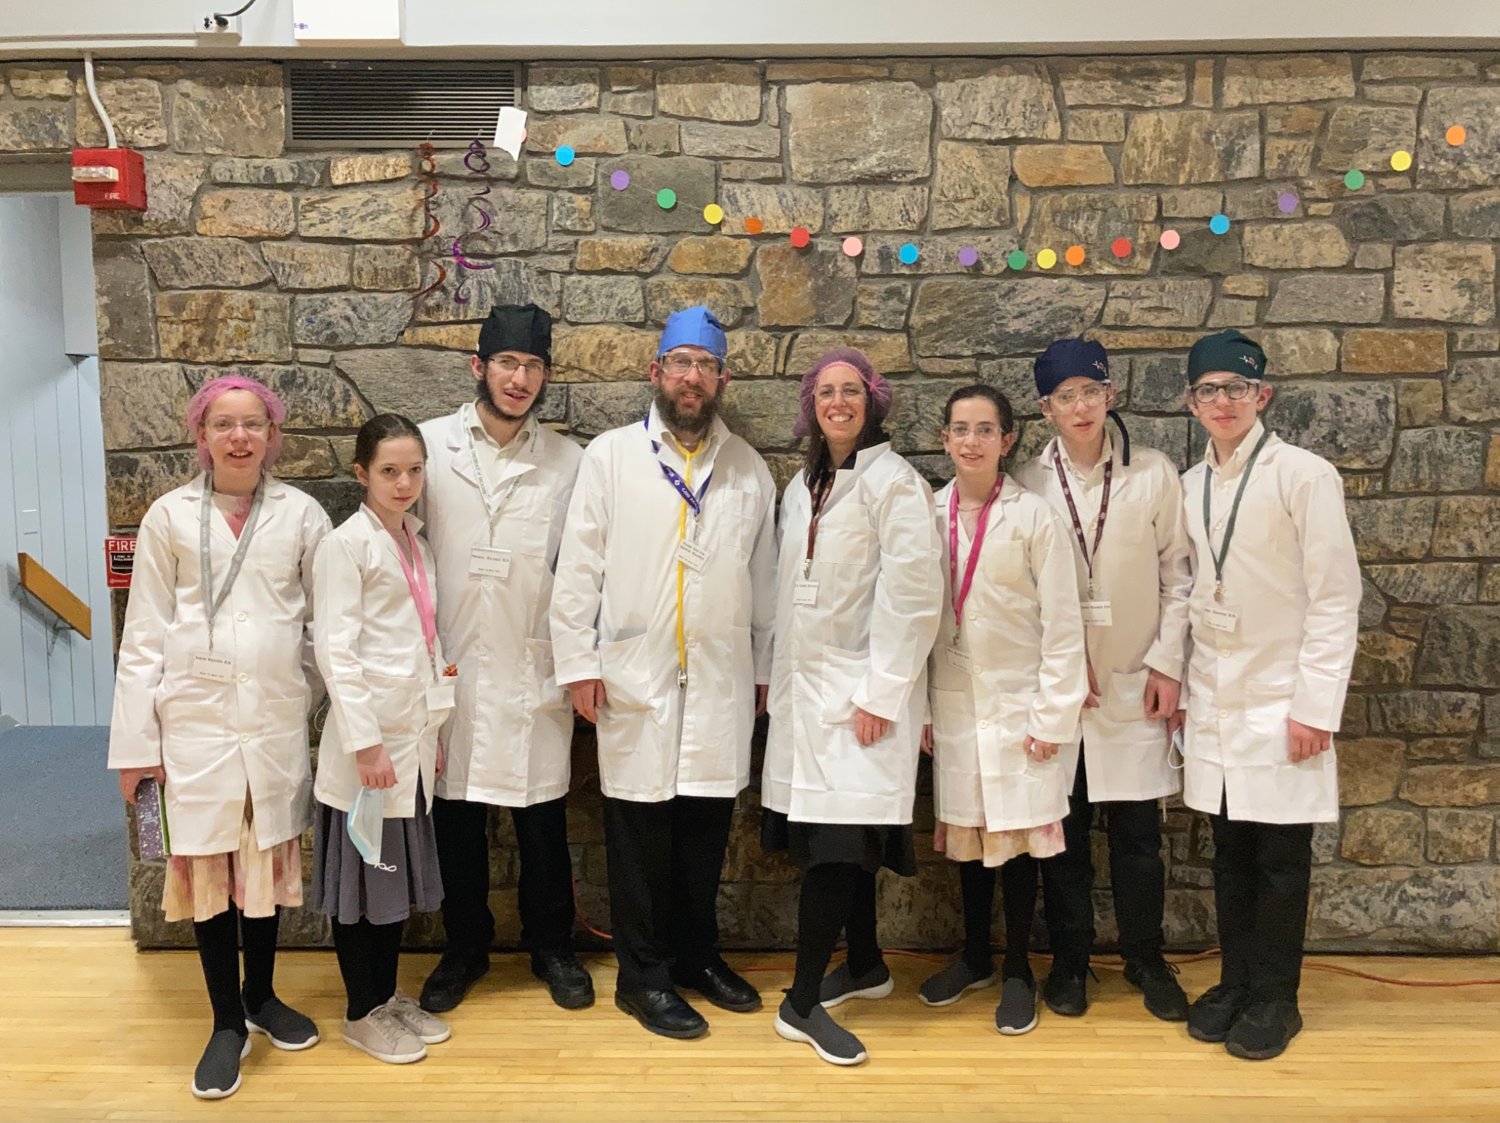 The Kramer family dressed up as essential workers to pay homage to those still serving on the frontlines of the coronavirus pandemic almost a year later.